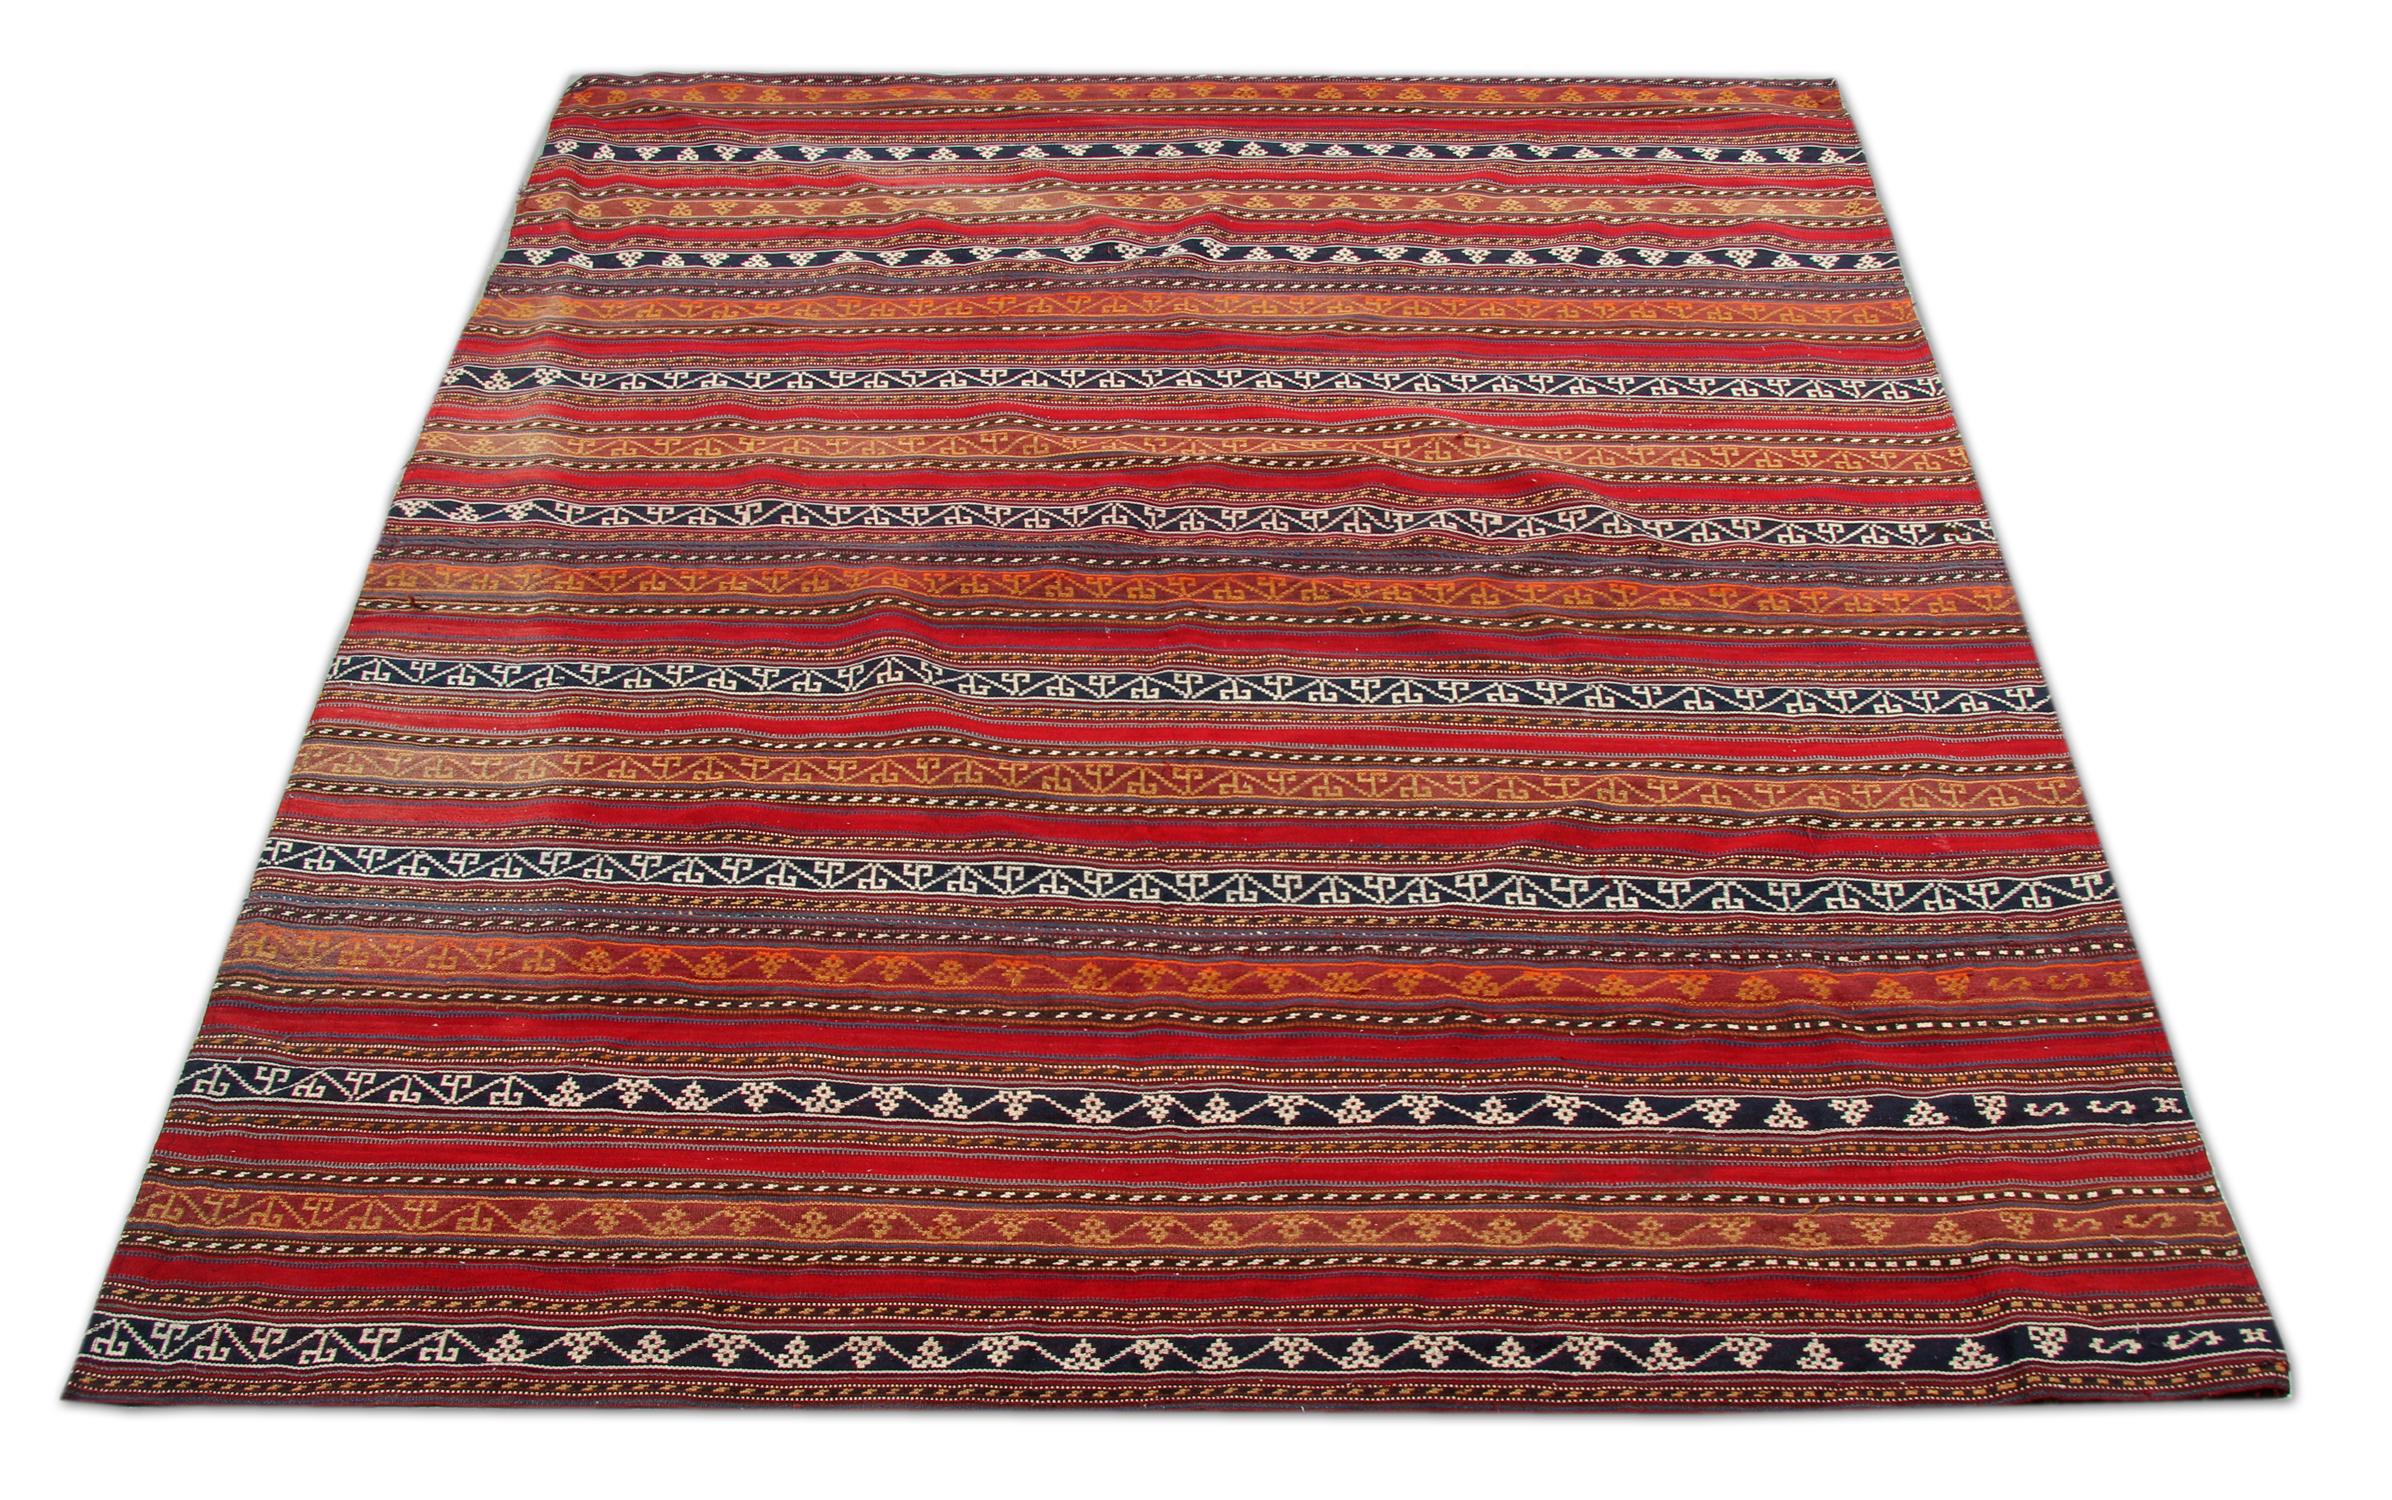 This unique Jajim textile has been woven with a palette of red, orange, black and brown that make up the elegant stripe geometric design. This piece has an elegant color and pattern making it perfect for any home interior.
Constructed with fine,